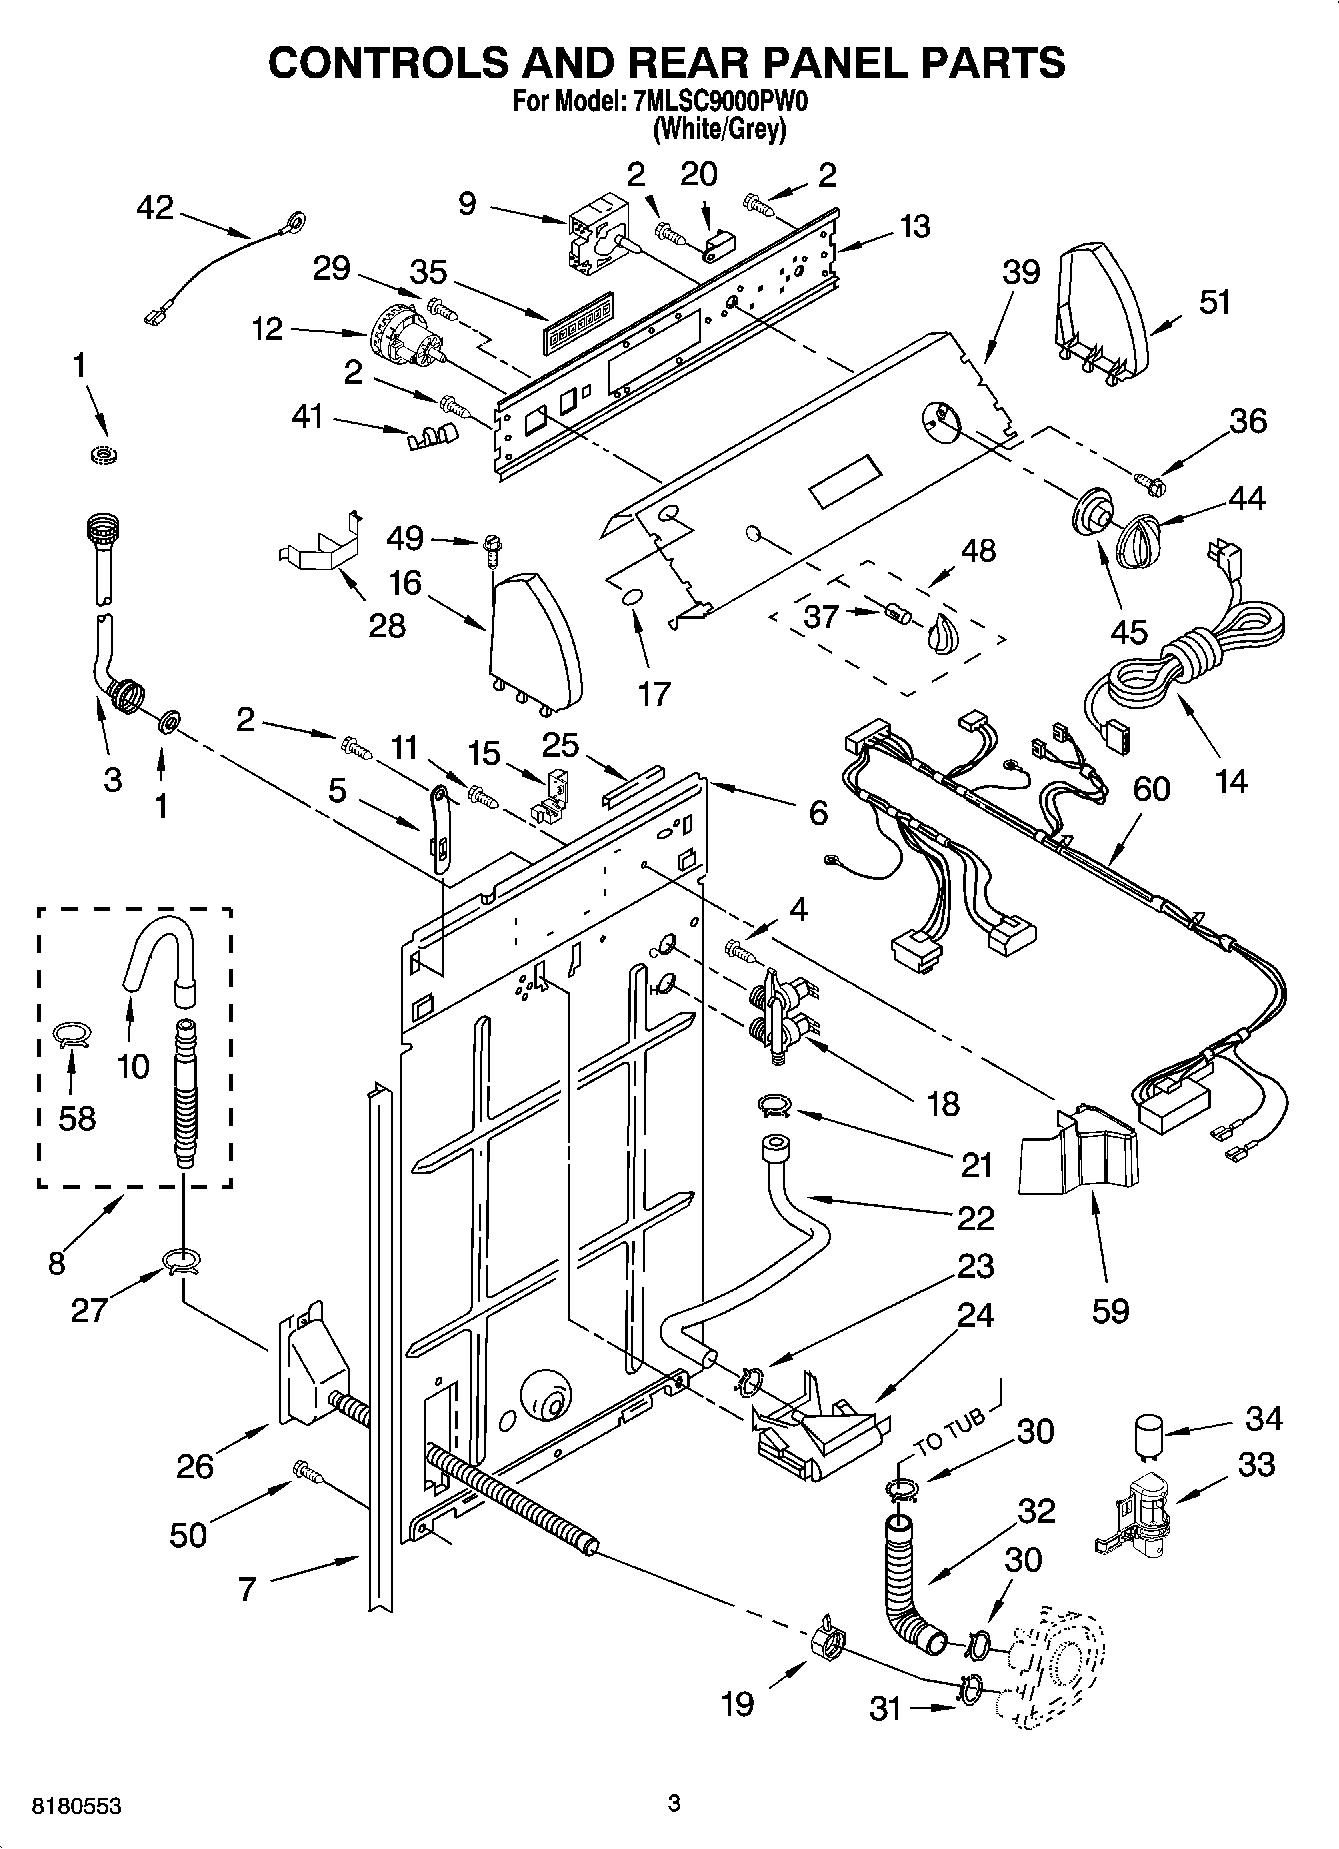 02 - CONTROLS AND REAR PANEL PARTS